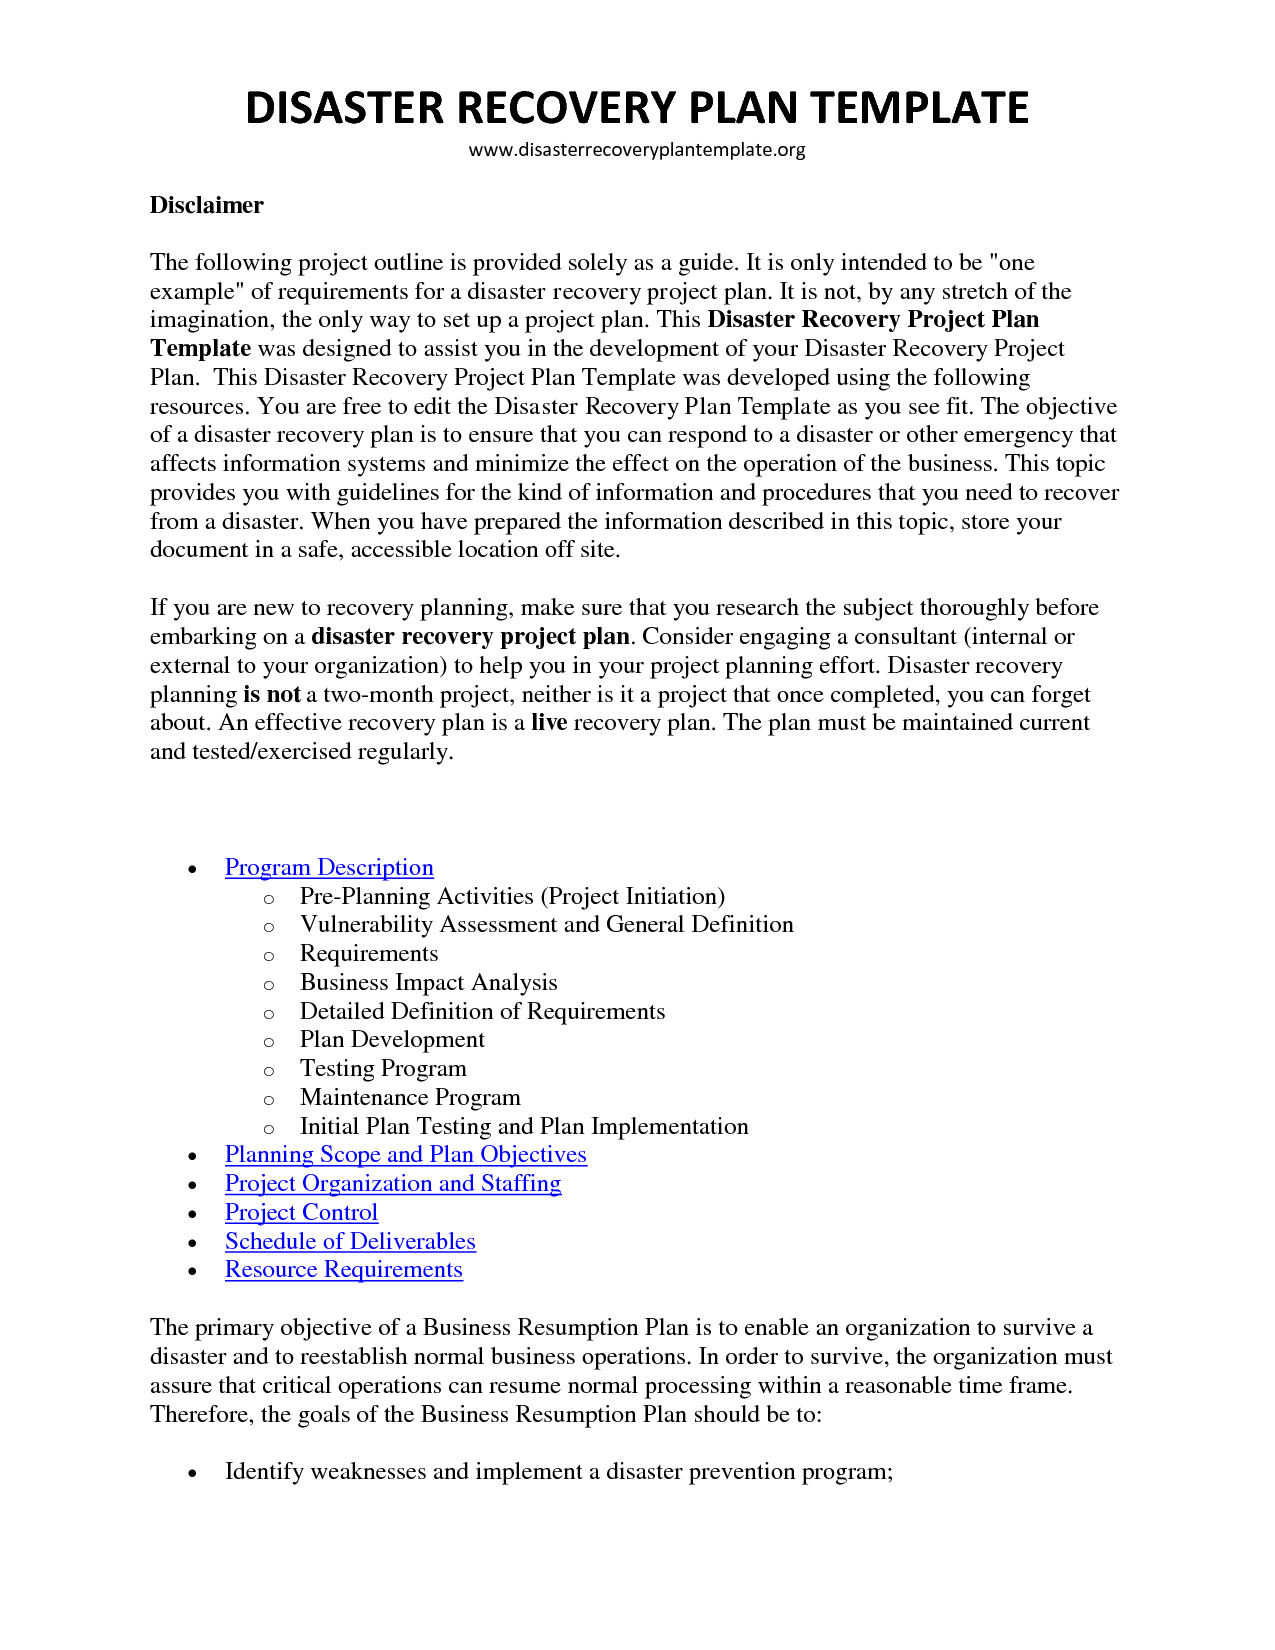 disaster recovery plan template cyberuse business continuity word 